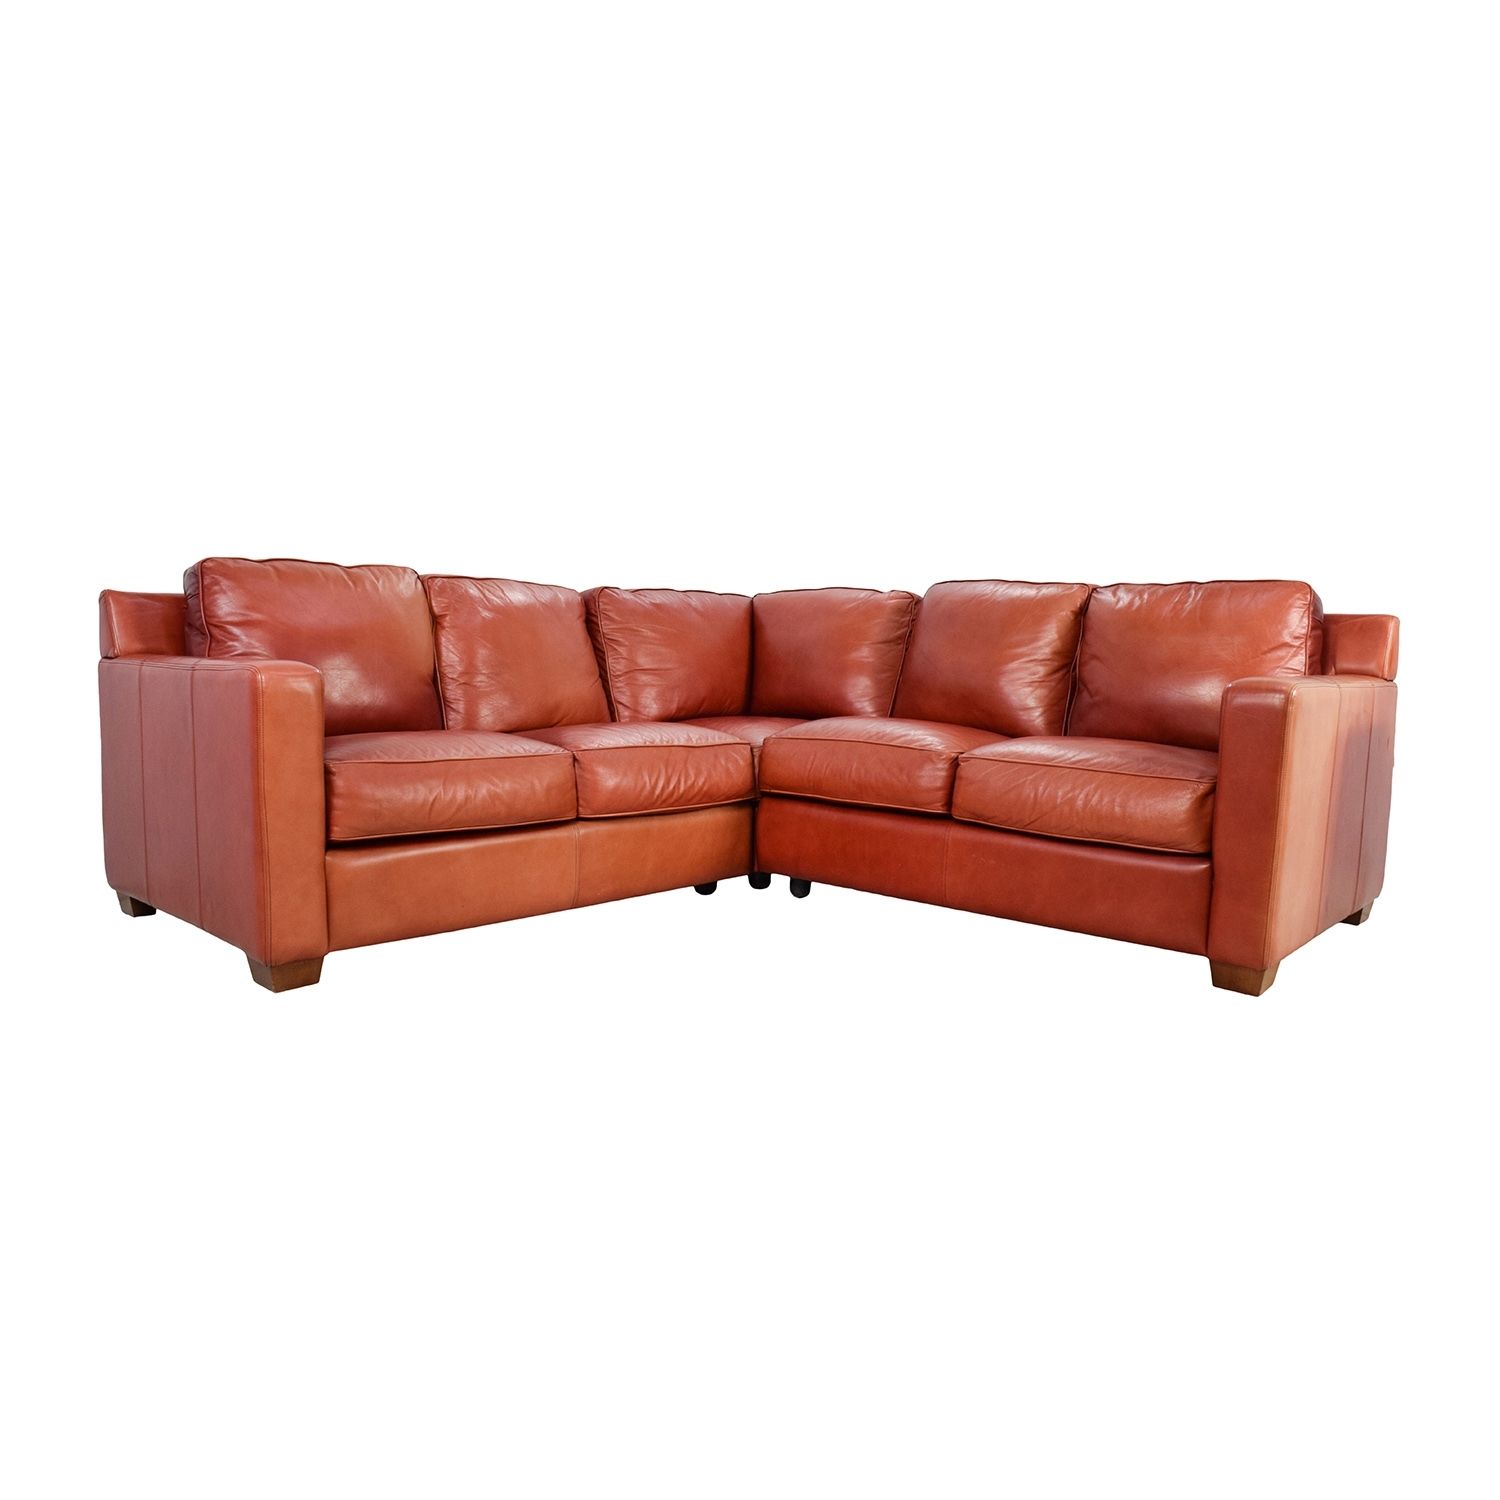 68% Off – Thomasville Thomasville Red Leather Sectional / Sofas Regarding Thomasville Sectional Sofas (Photo 1 of 10)